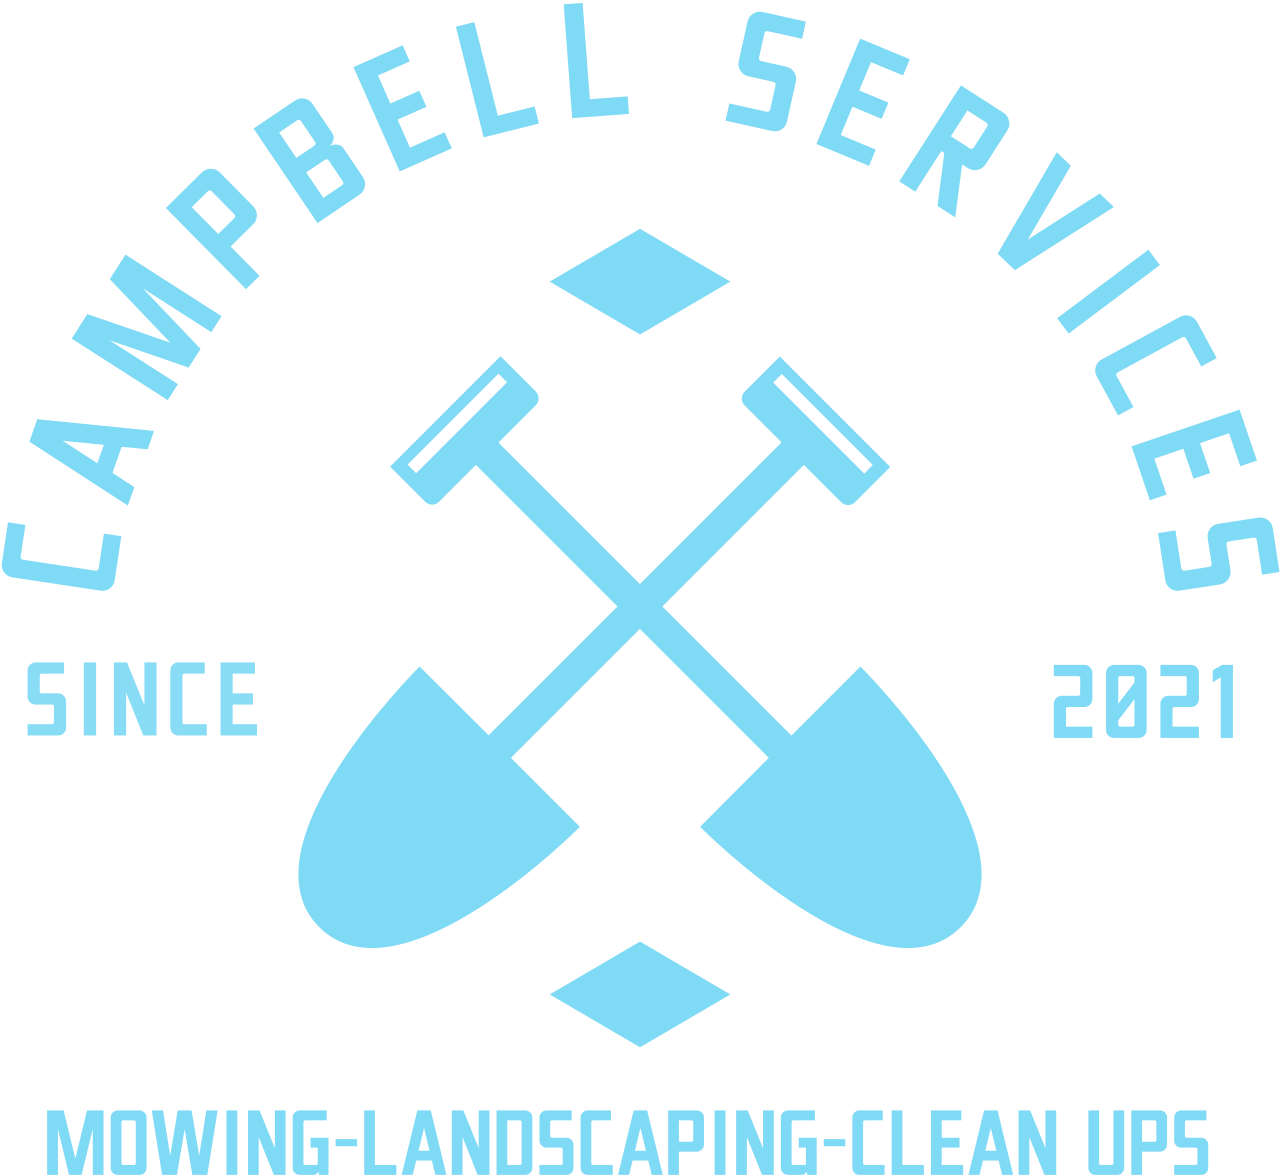 campbell services's logo